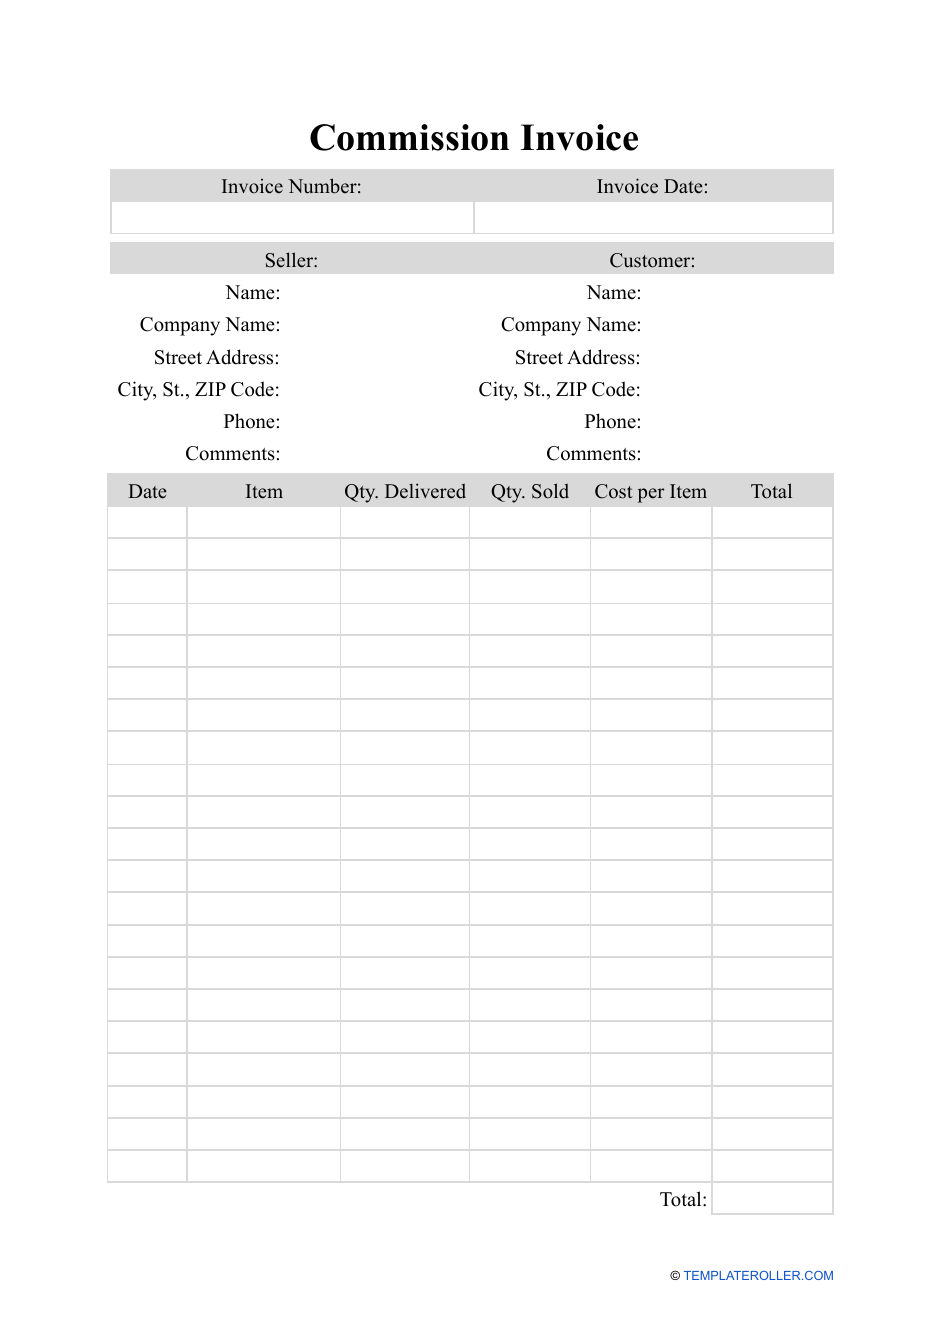 Commission Invoice Template, Page 1